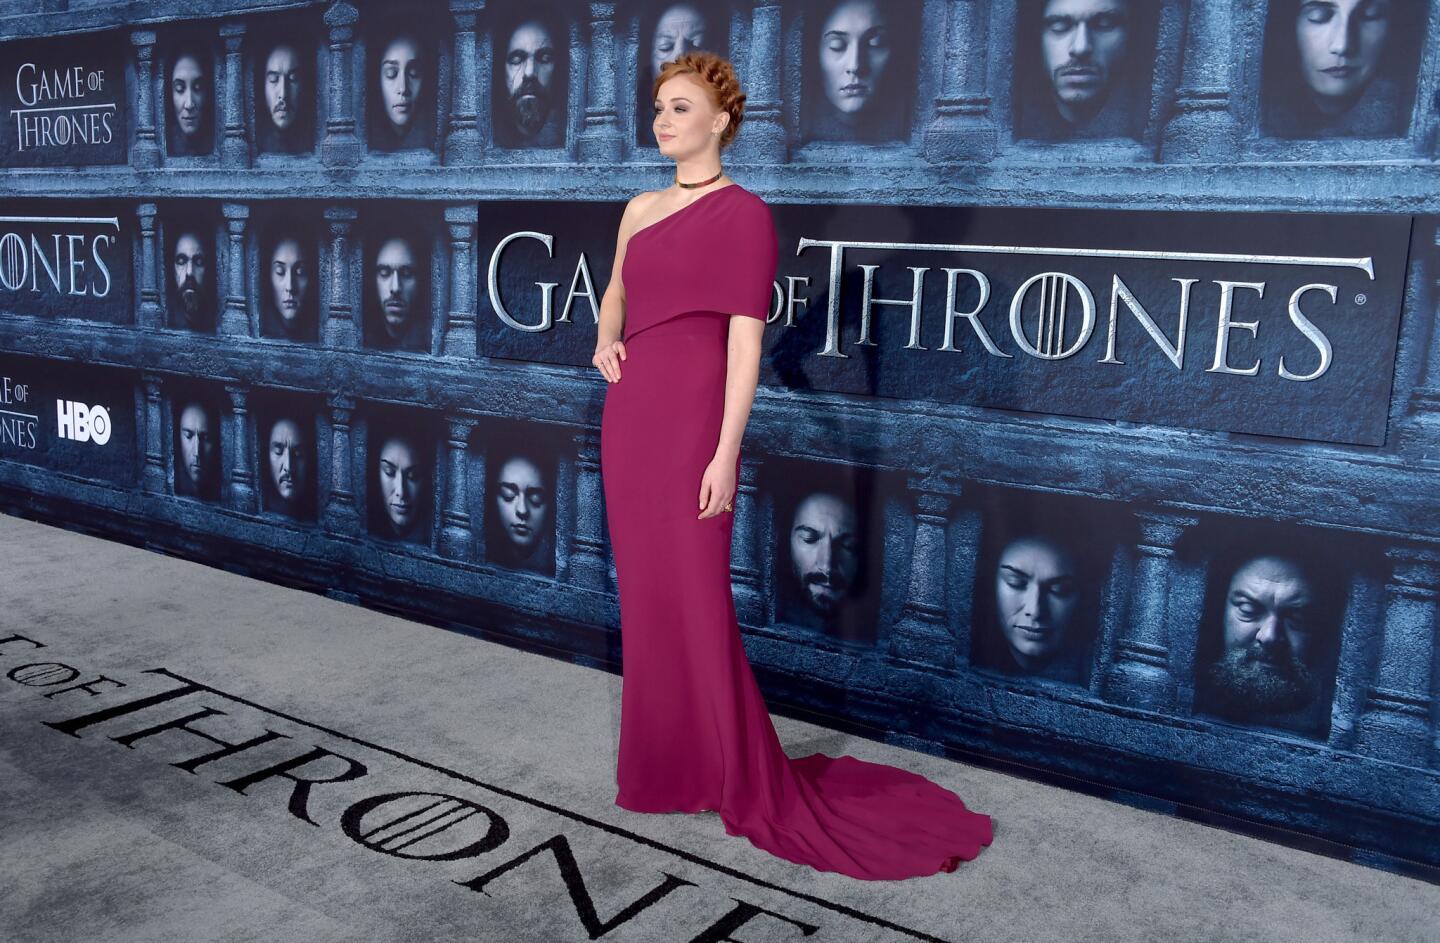 'Game of Thrones' premiere